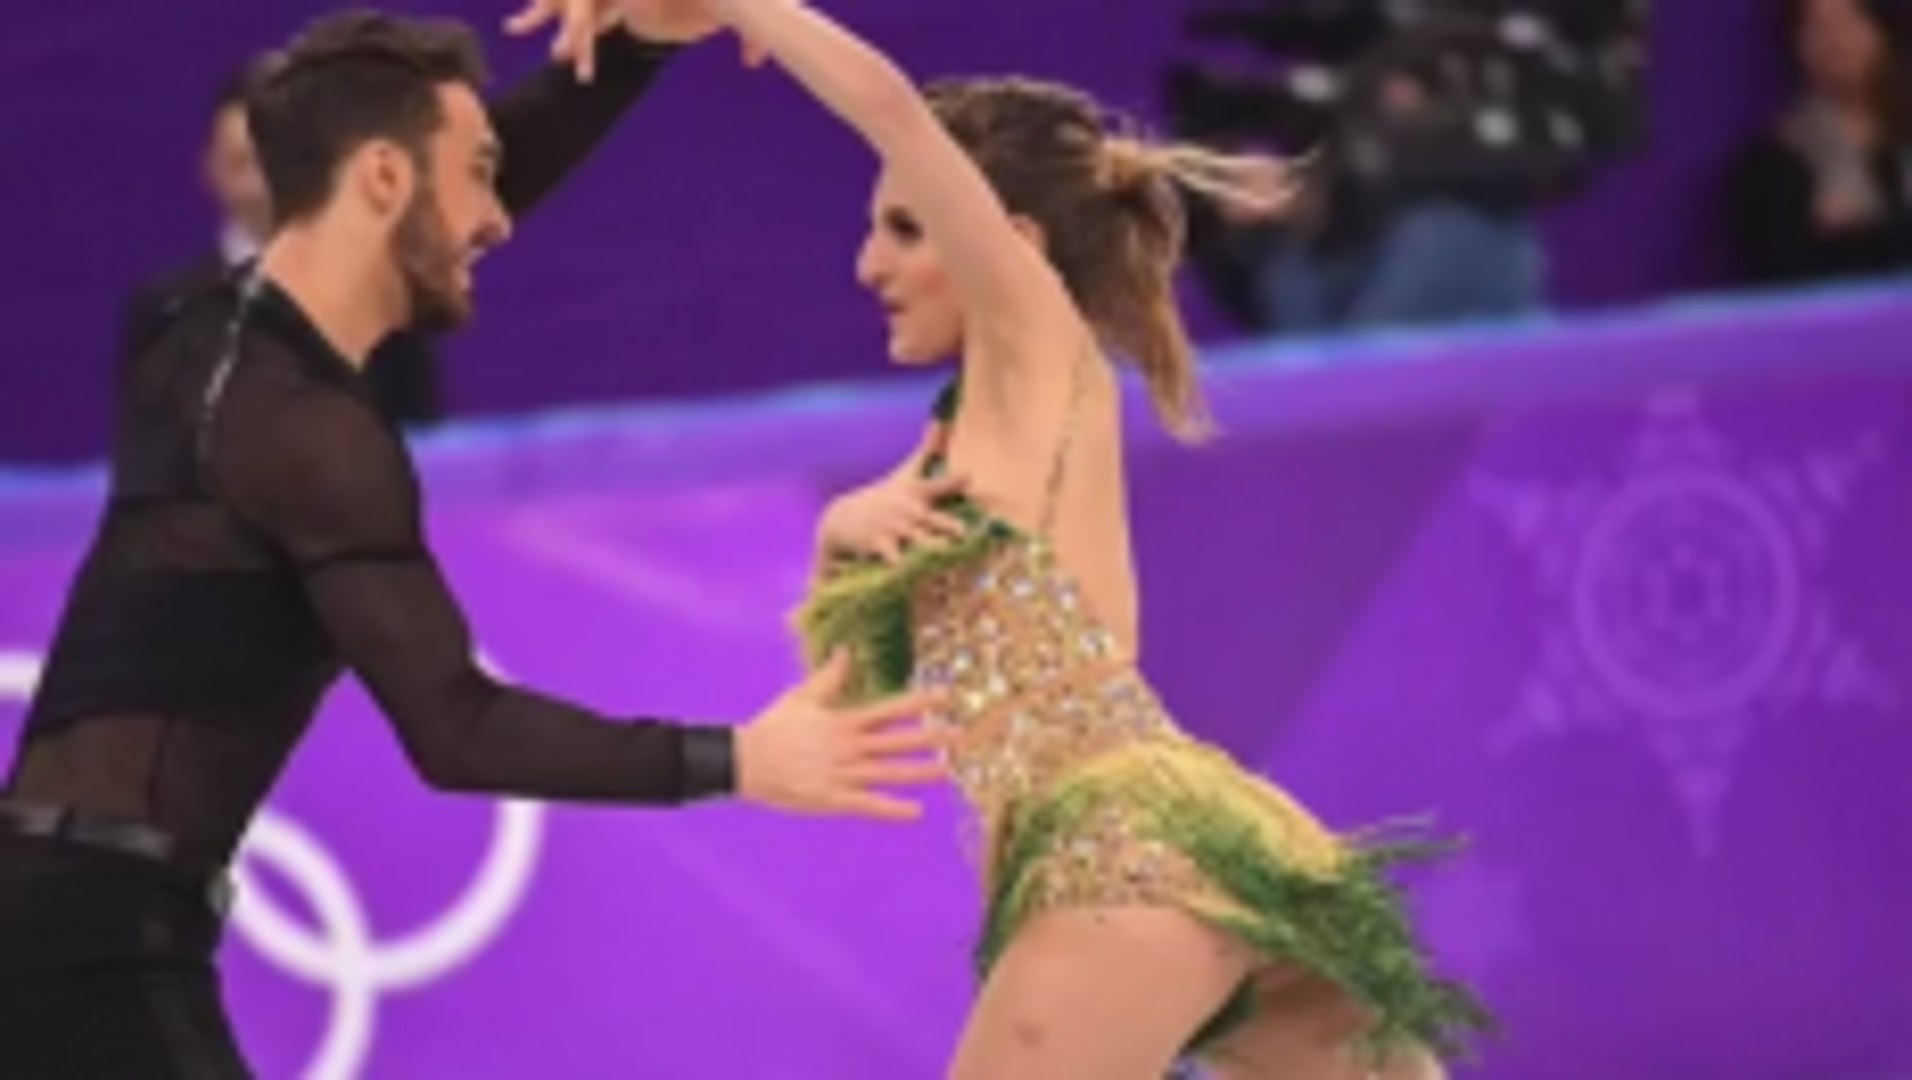 Figure skater Gabriella Papadakis breaks own record and wins Winter Olympic  silver medal after wardrobe malfunction nightmare - video Dailymotion